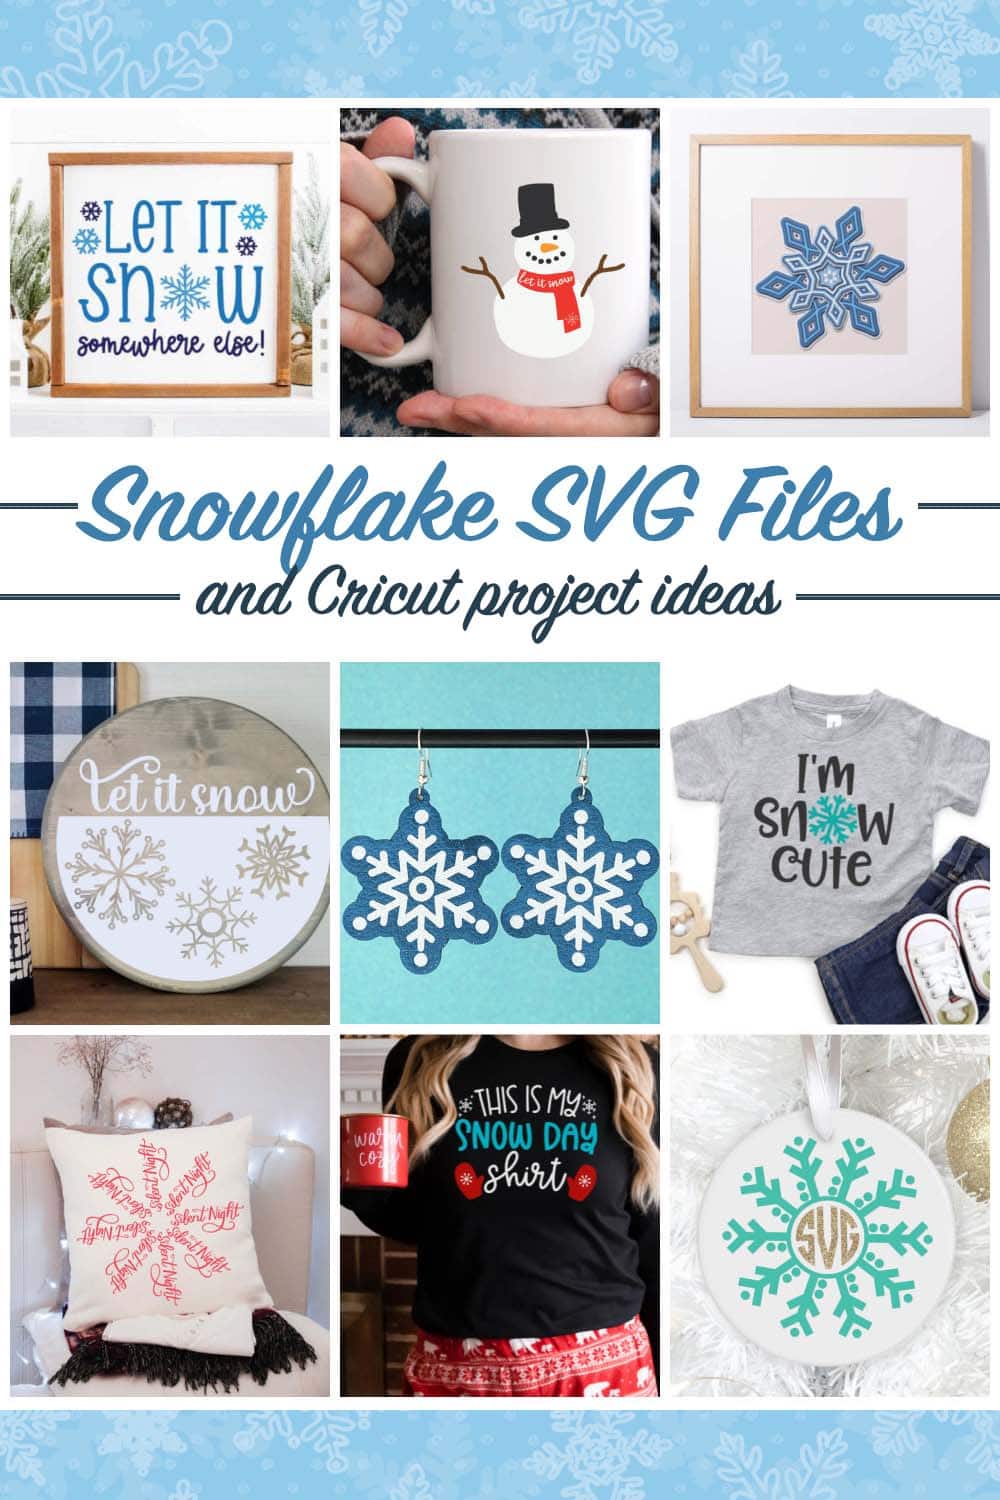 Snowflake SVG files and project ideas to create